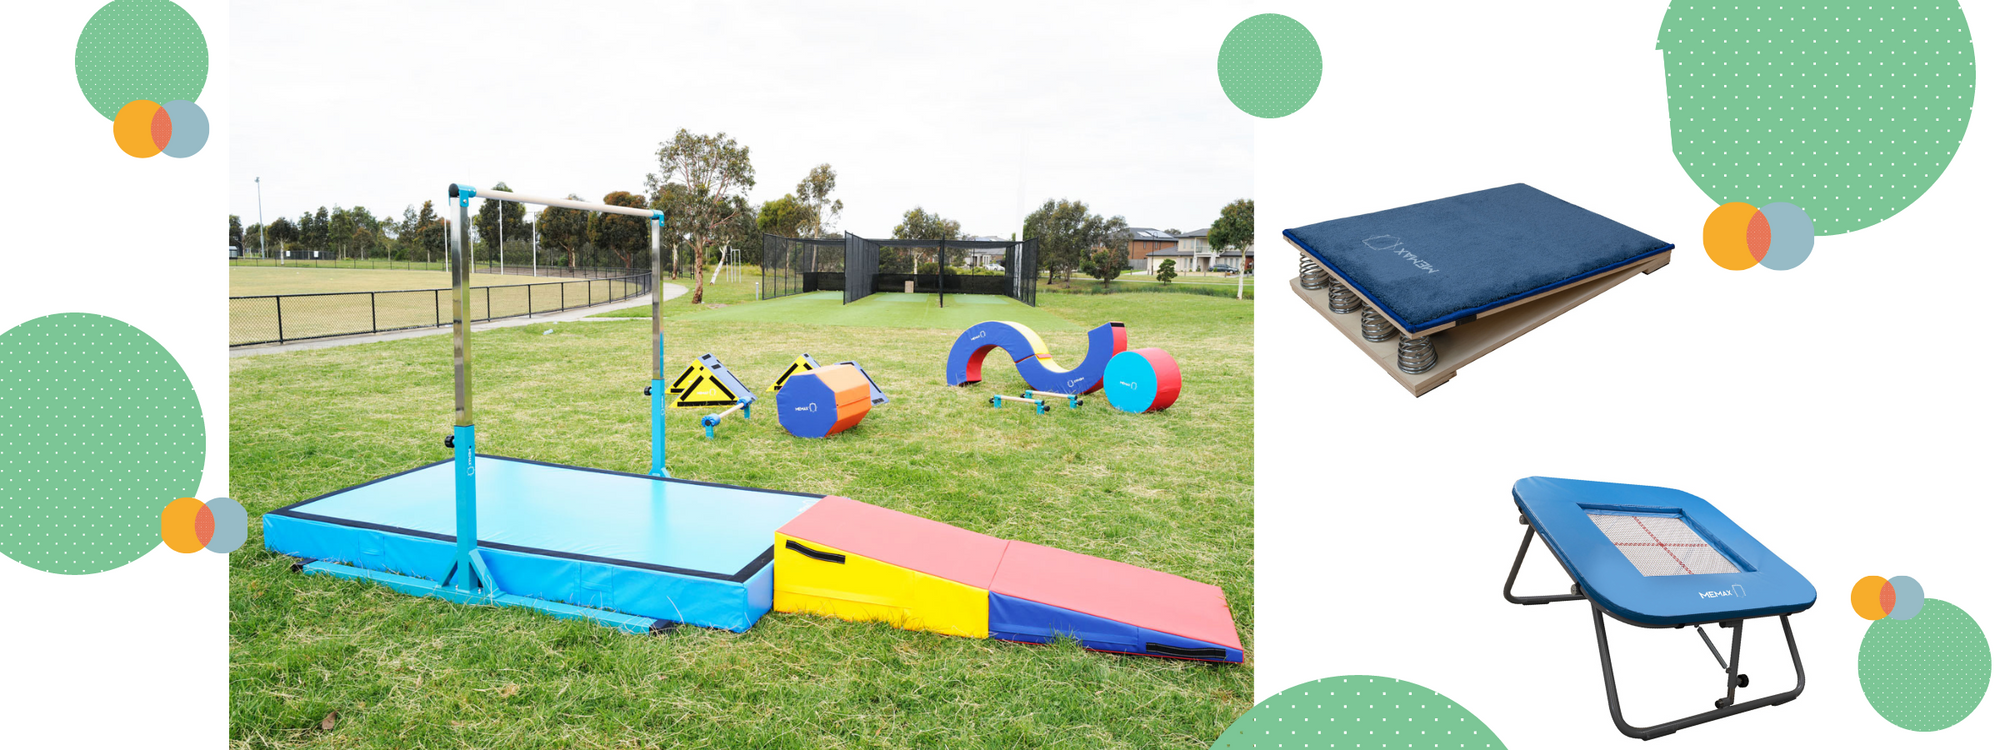 Quality Gymnastics Training Aids Buying Guide in Australia